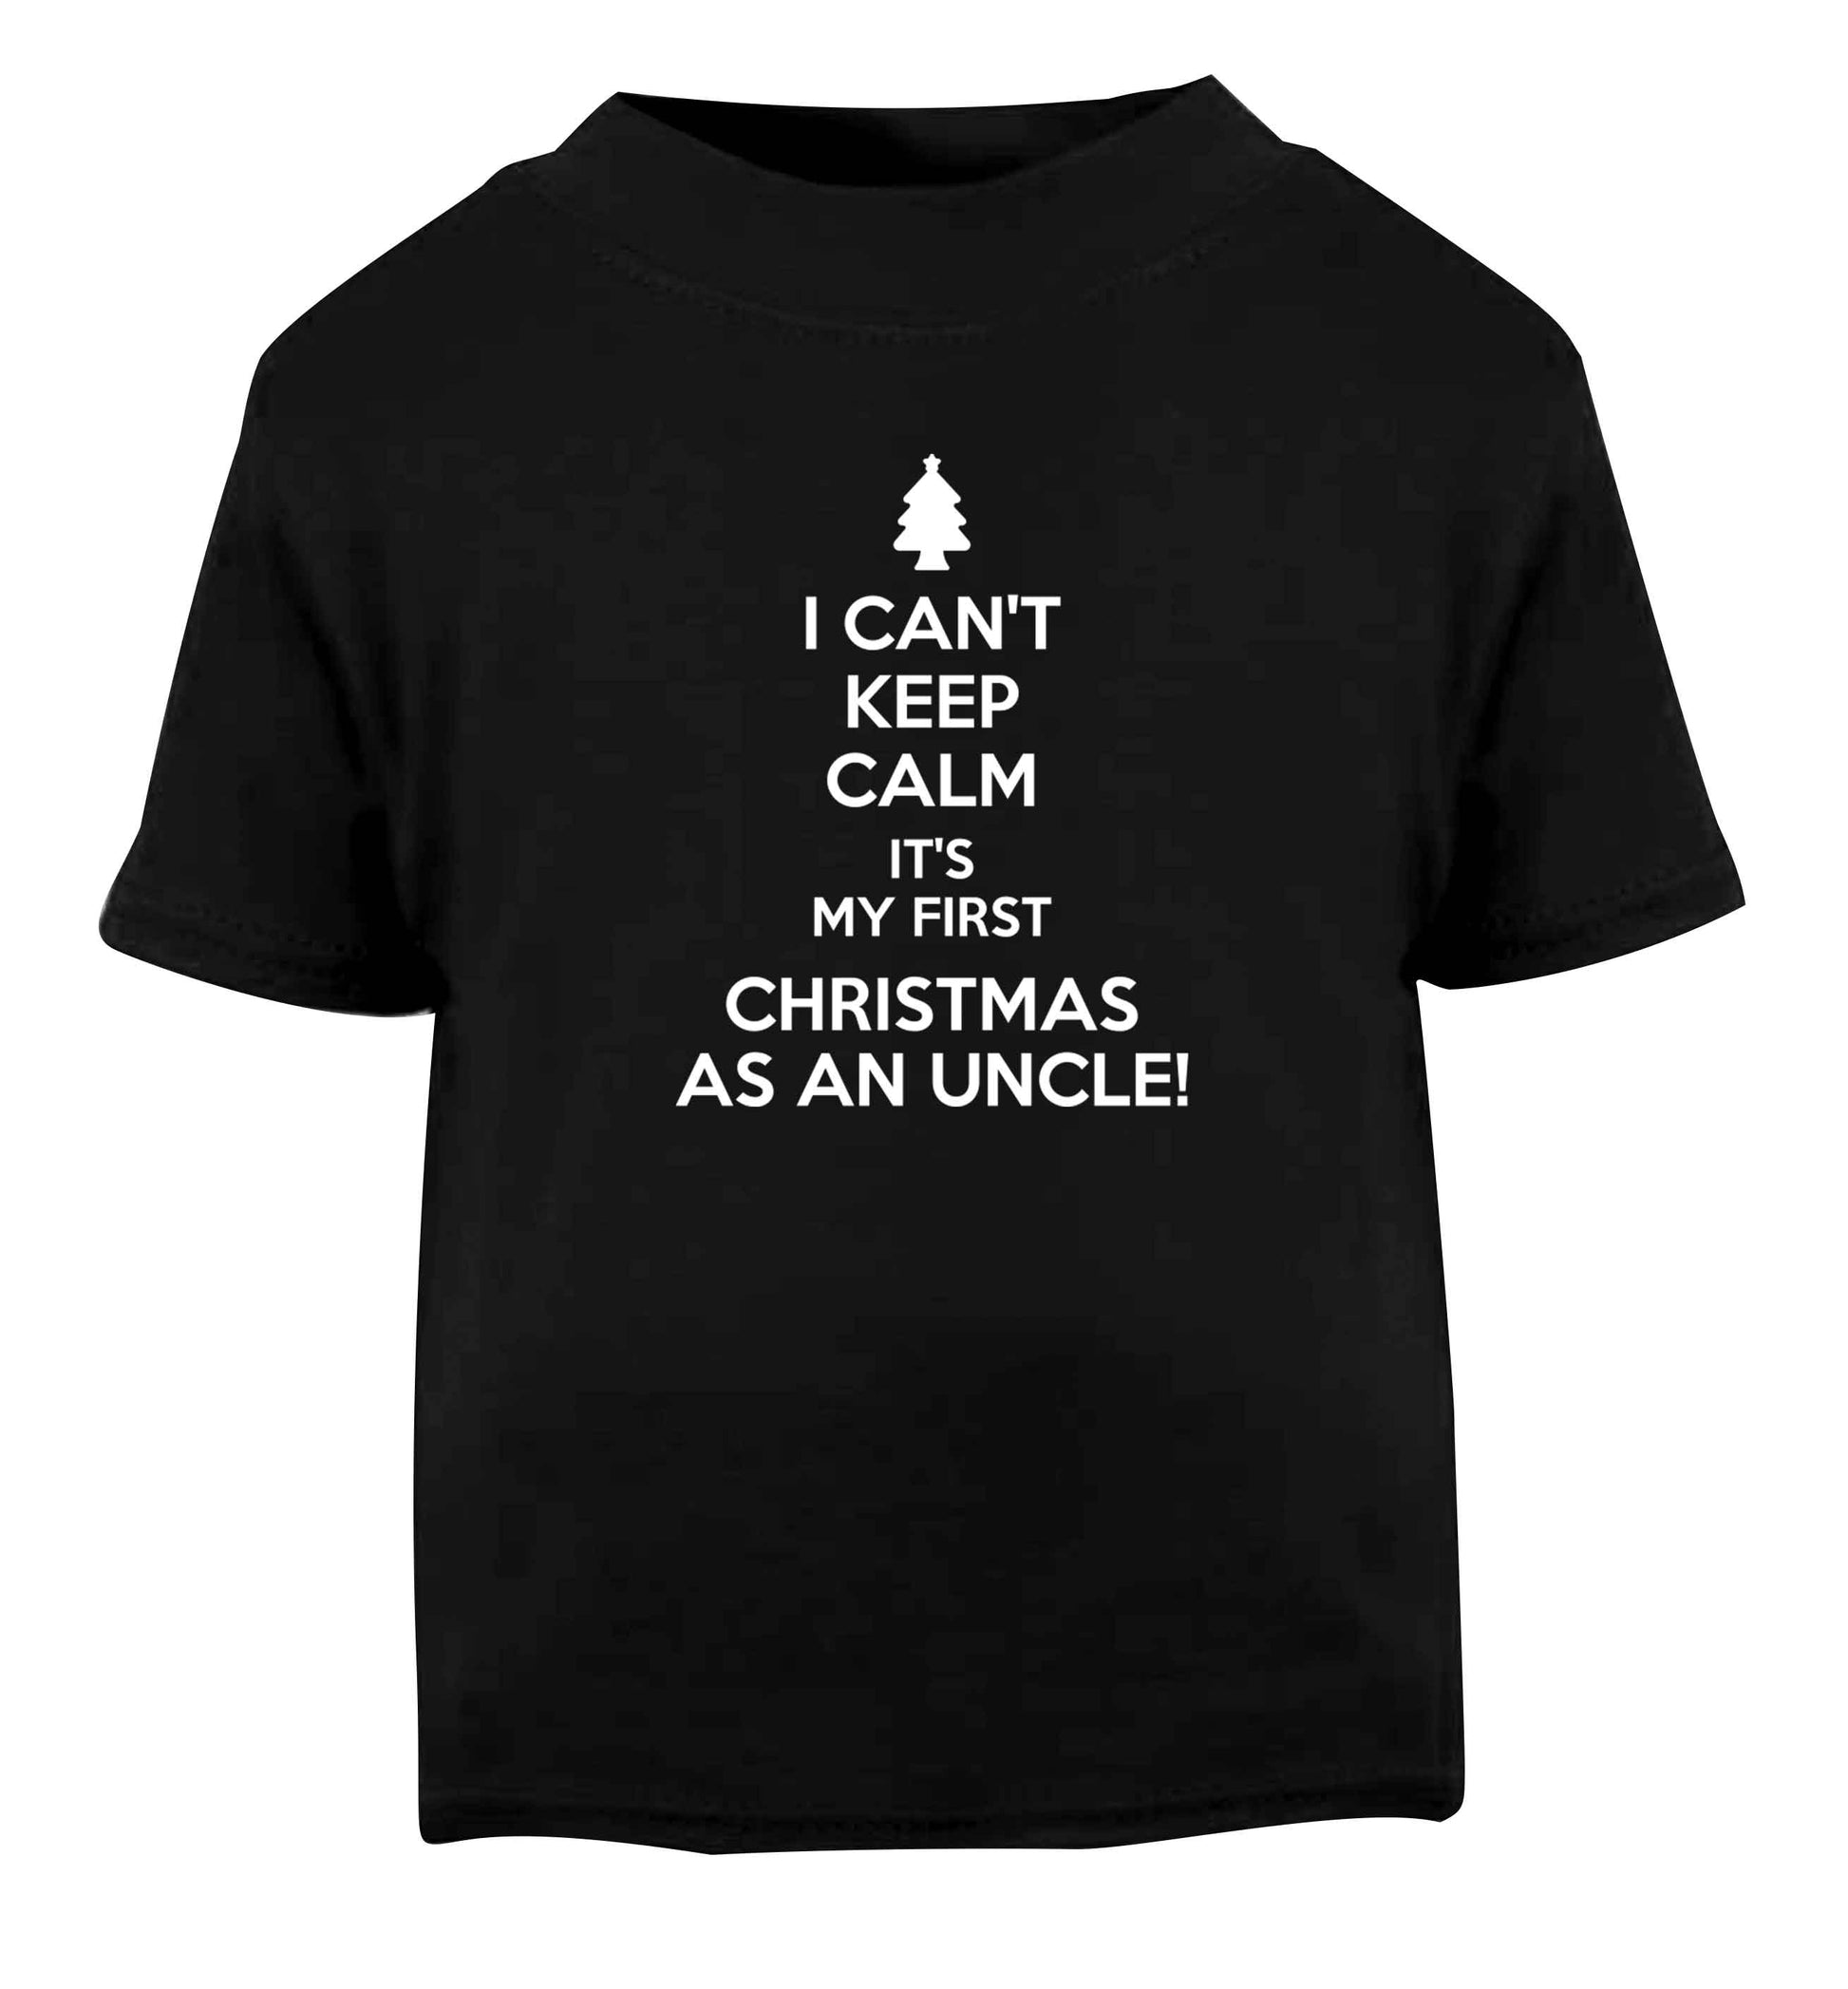 I can't keep calm it's my first Christmas as an uncle! Black Baby Toddler Tshirt 2 years